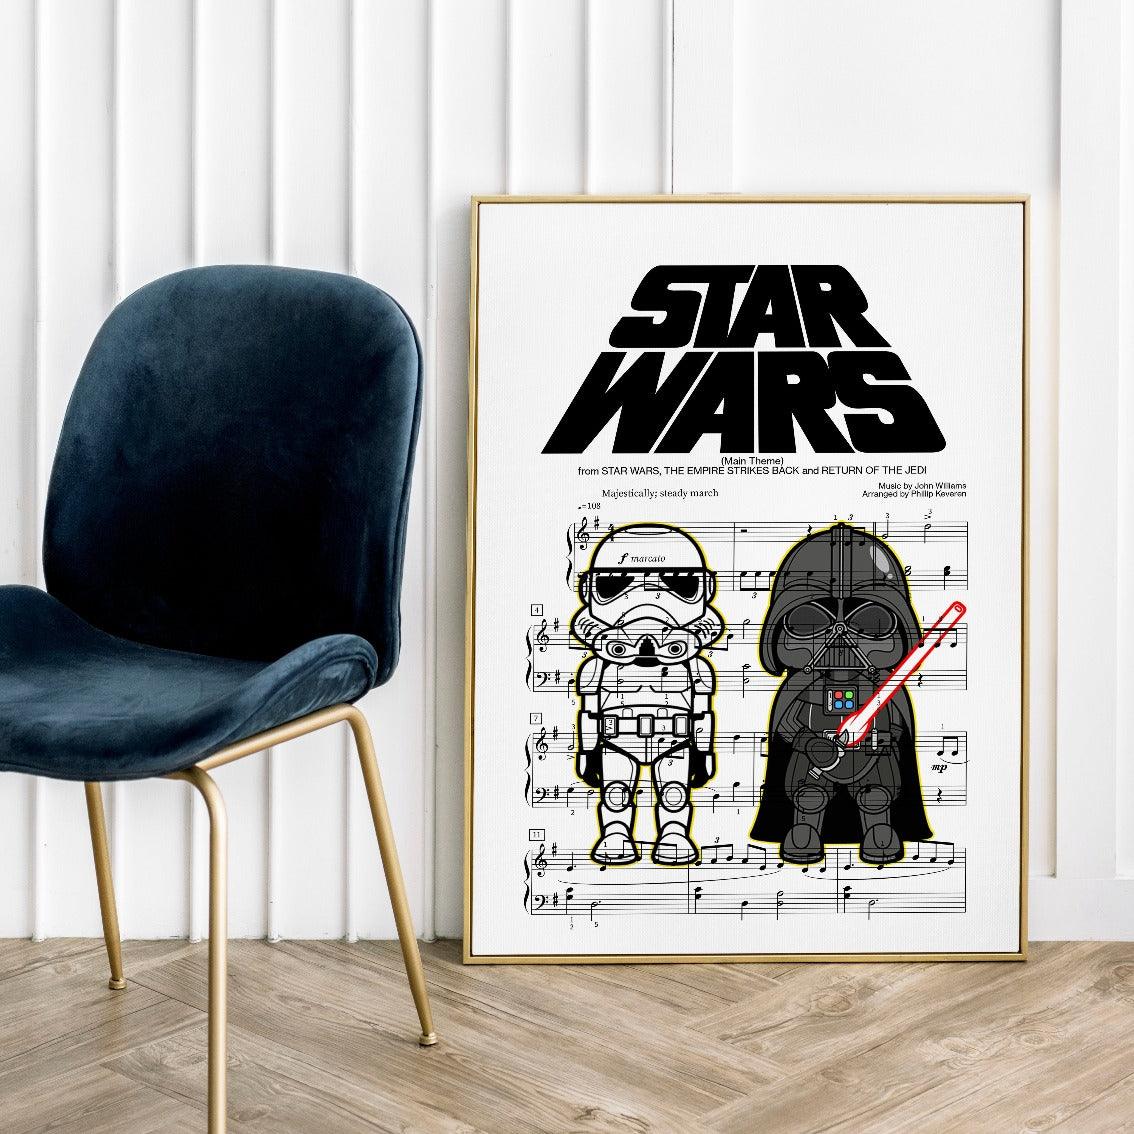 Star Wars - Medley Print | Sheet Music Wall Art | Song Music Sheet Notes Print  These posters are perfect for fans of Star Wars. With minimalistic prints and bold colours, this movie poster is sure to leave you mesmerised. This print is made from thick Premium Natural White Archival Quality 230gsm poster paper, which gives crisp lines and bold colours. With a minimalist look and feel, these posters will surely grab your attention!